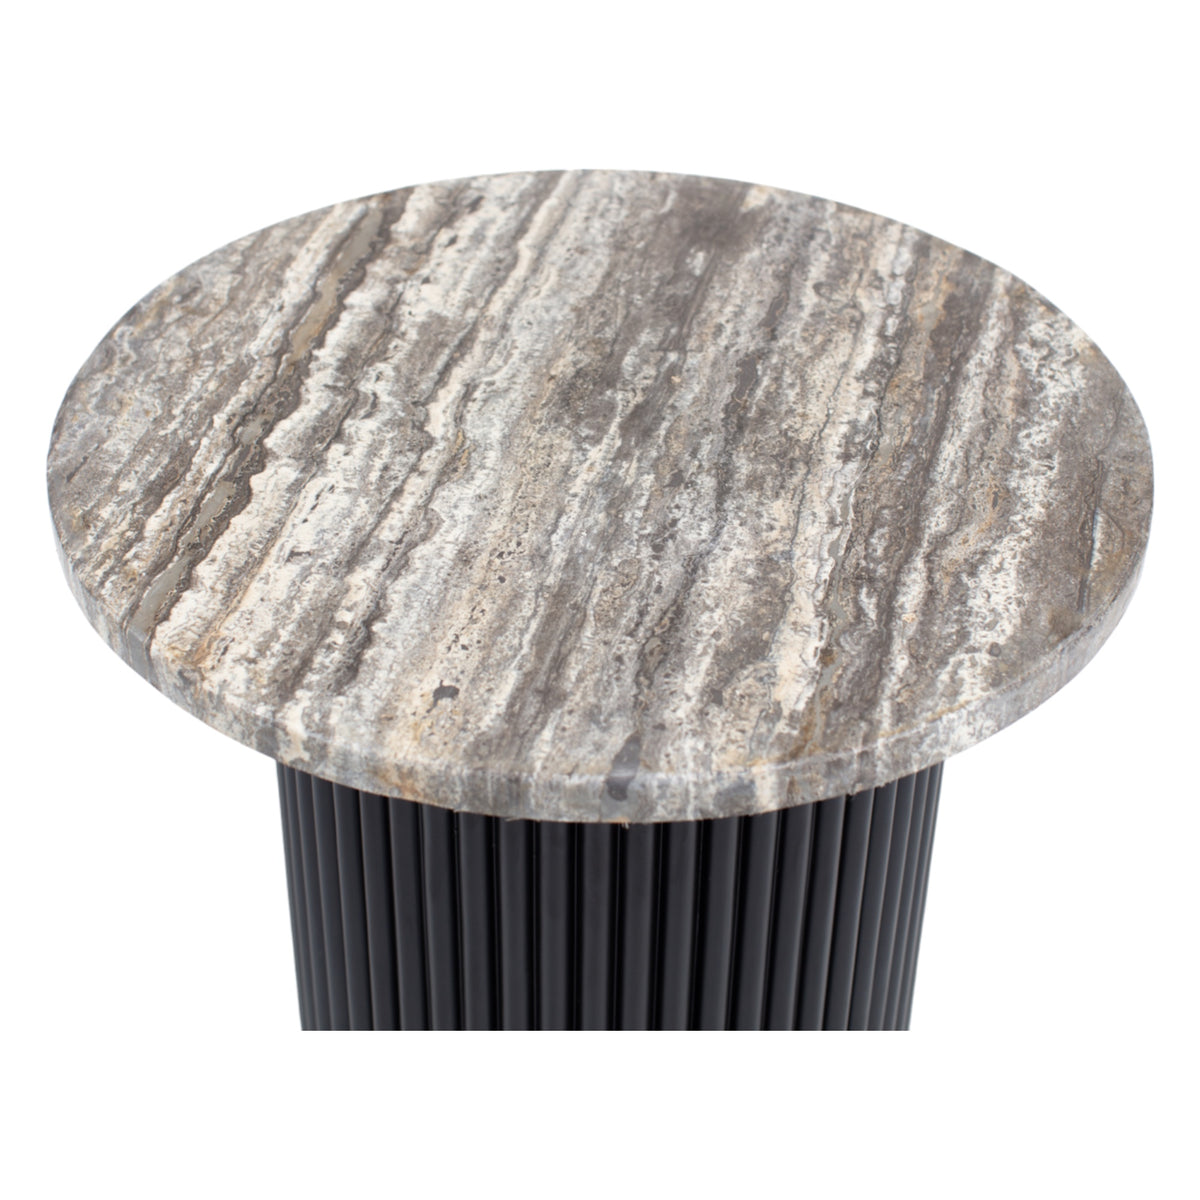 HAND MADE NORDIC BLACK FLUTED GREY TRAVERINE SIDE TABLE